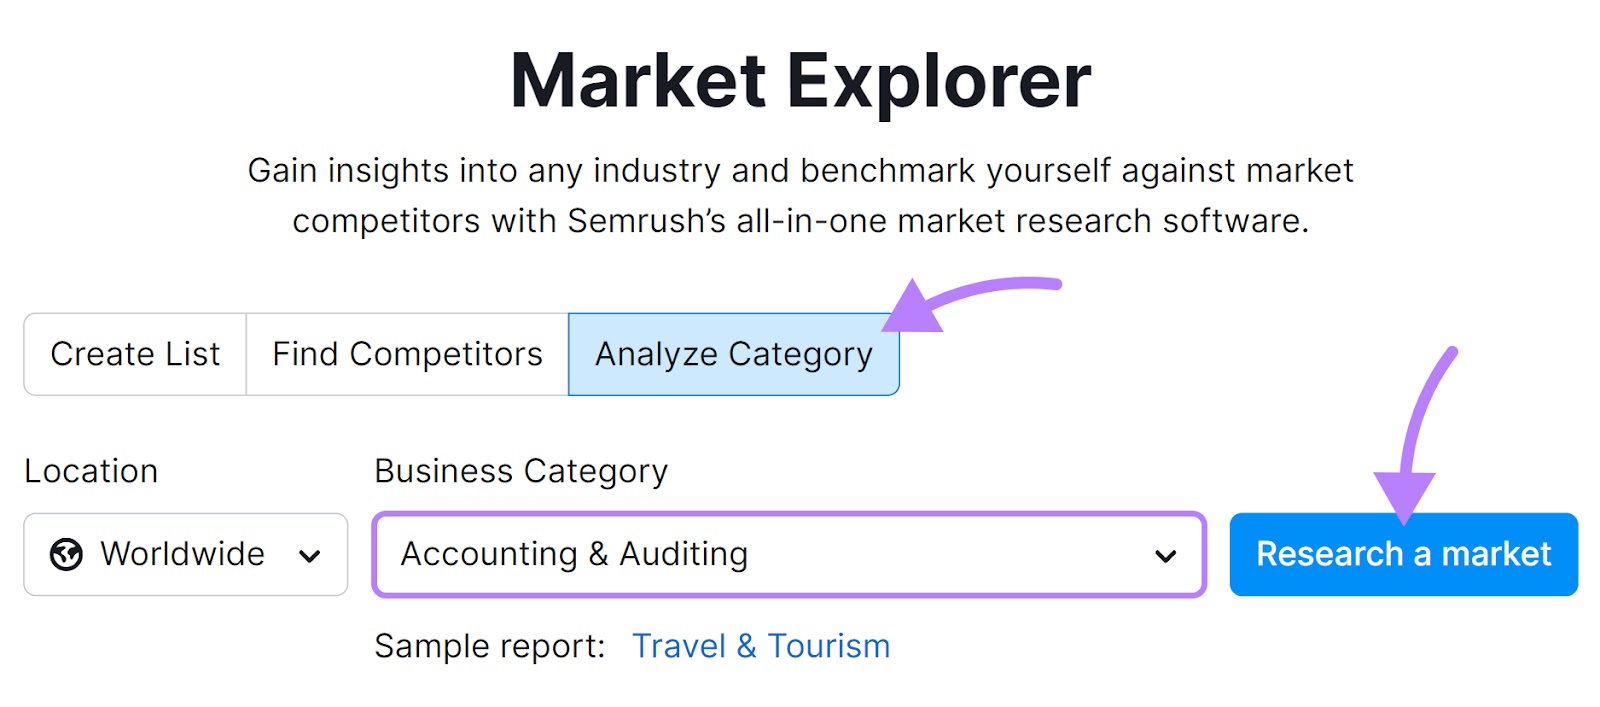 "Accounting & Auditing" category entered into the Market Explorer